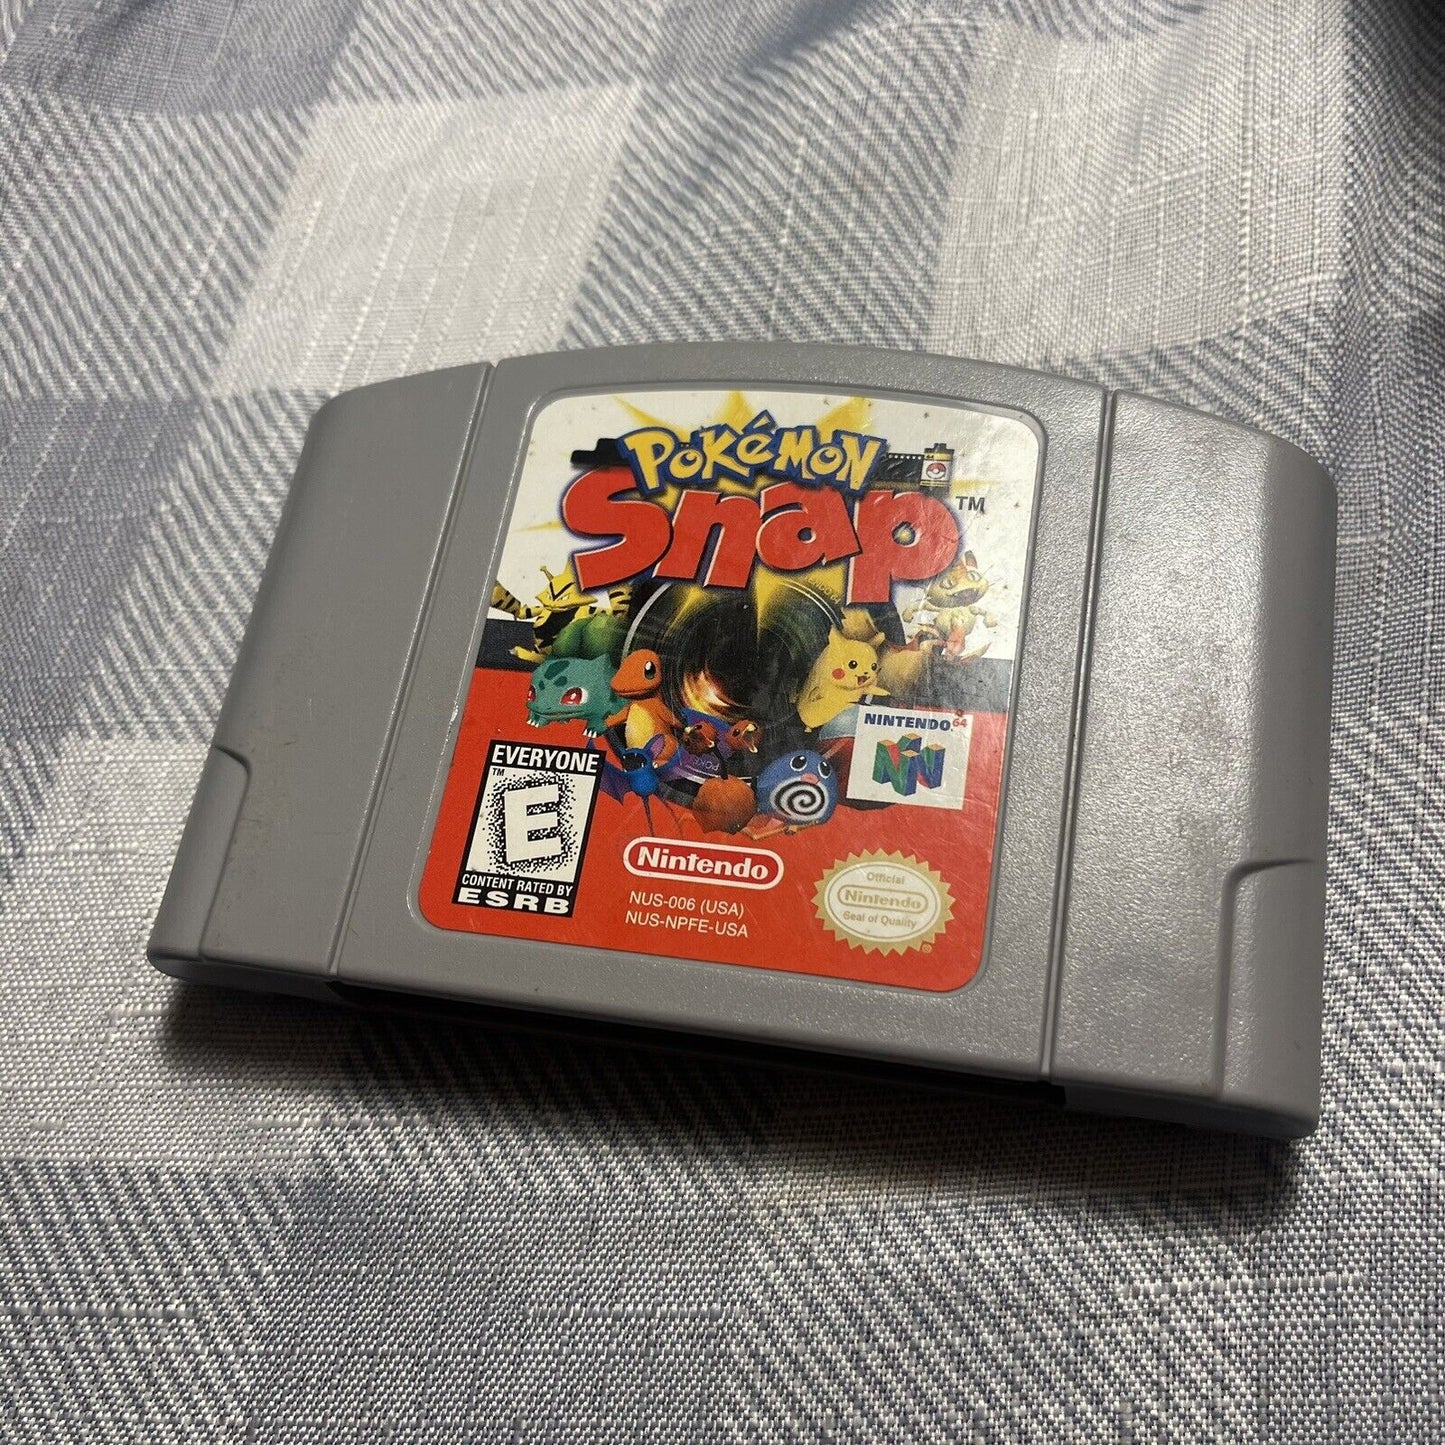 Pokemon Snap N64 (Nintendo 64, 1999) Tested / Authentic Works